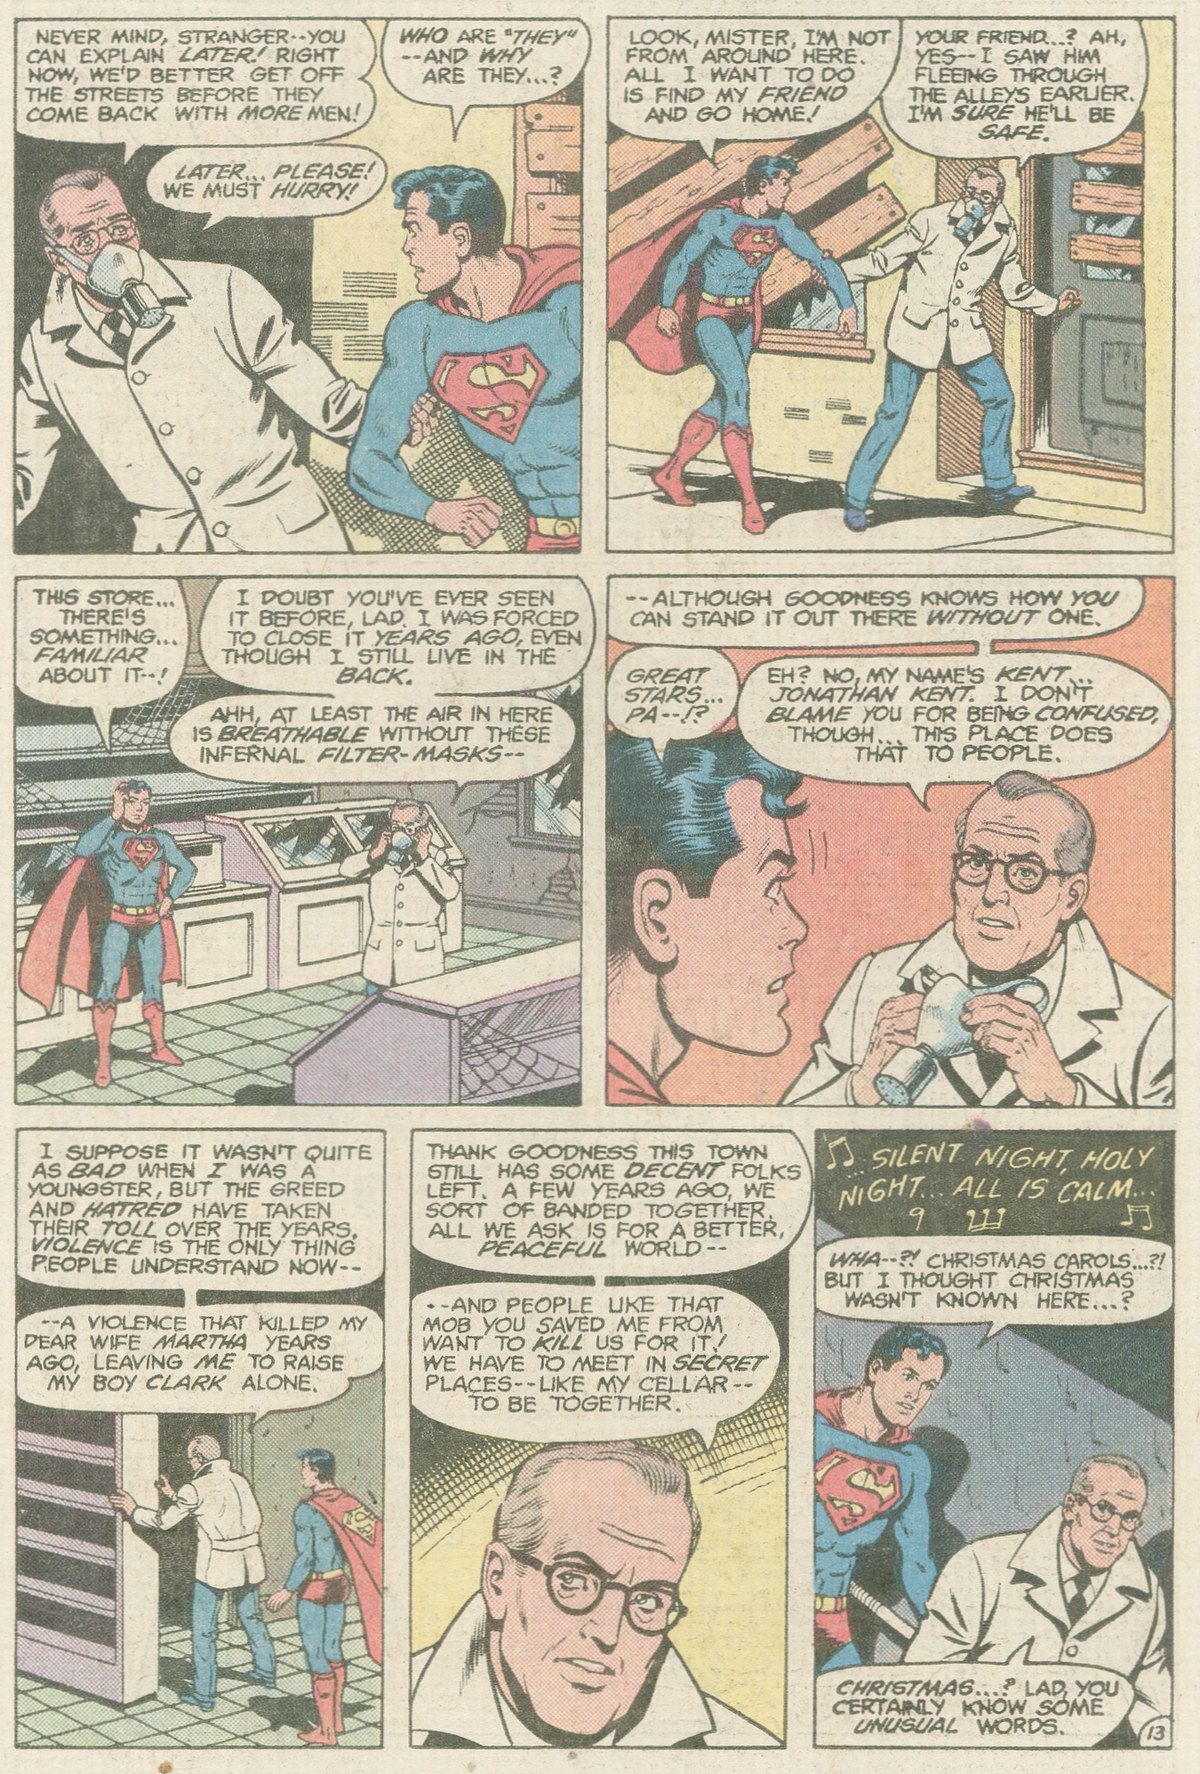 The New Adventures of Superboy 39 Page 13